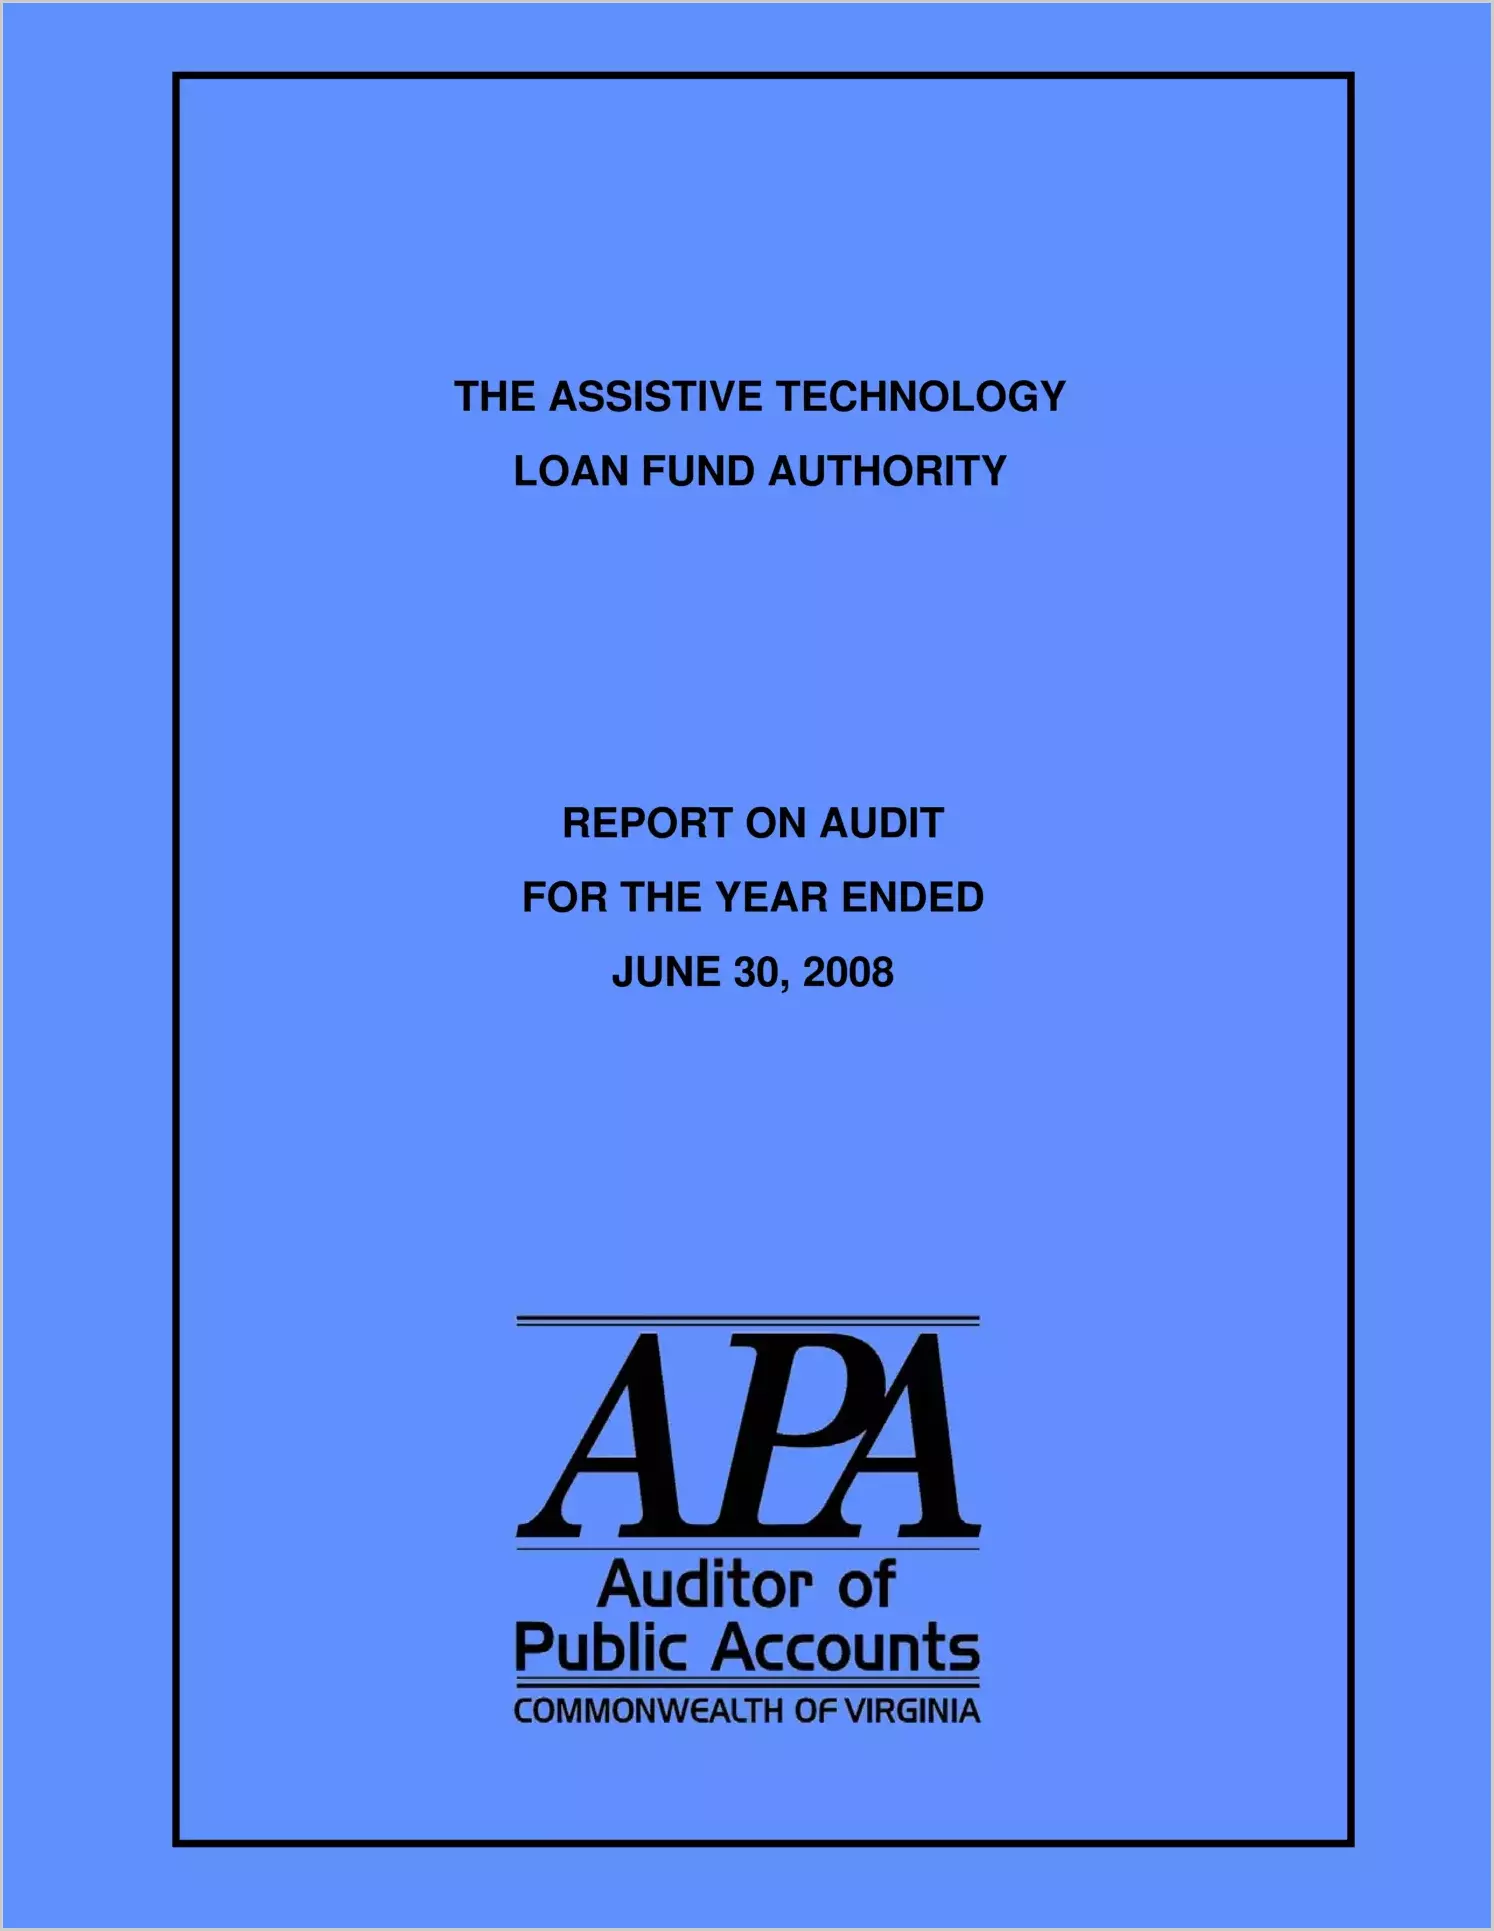 The Assistive Technology Loan Fund Authority report on audit for the year ended June 30, 2008